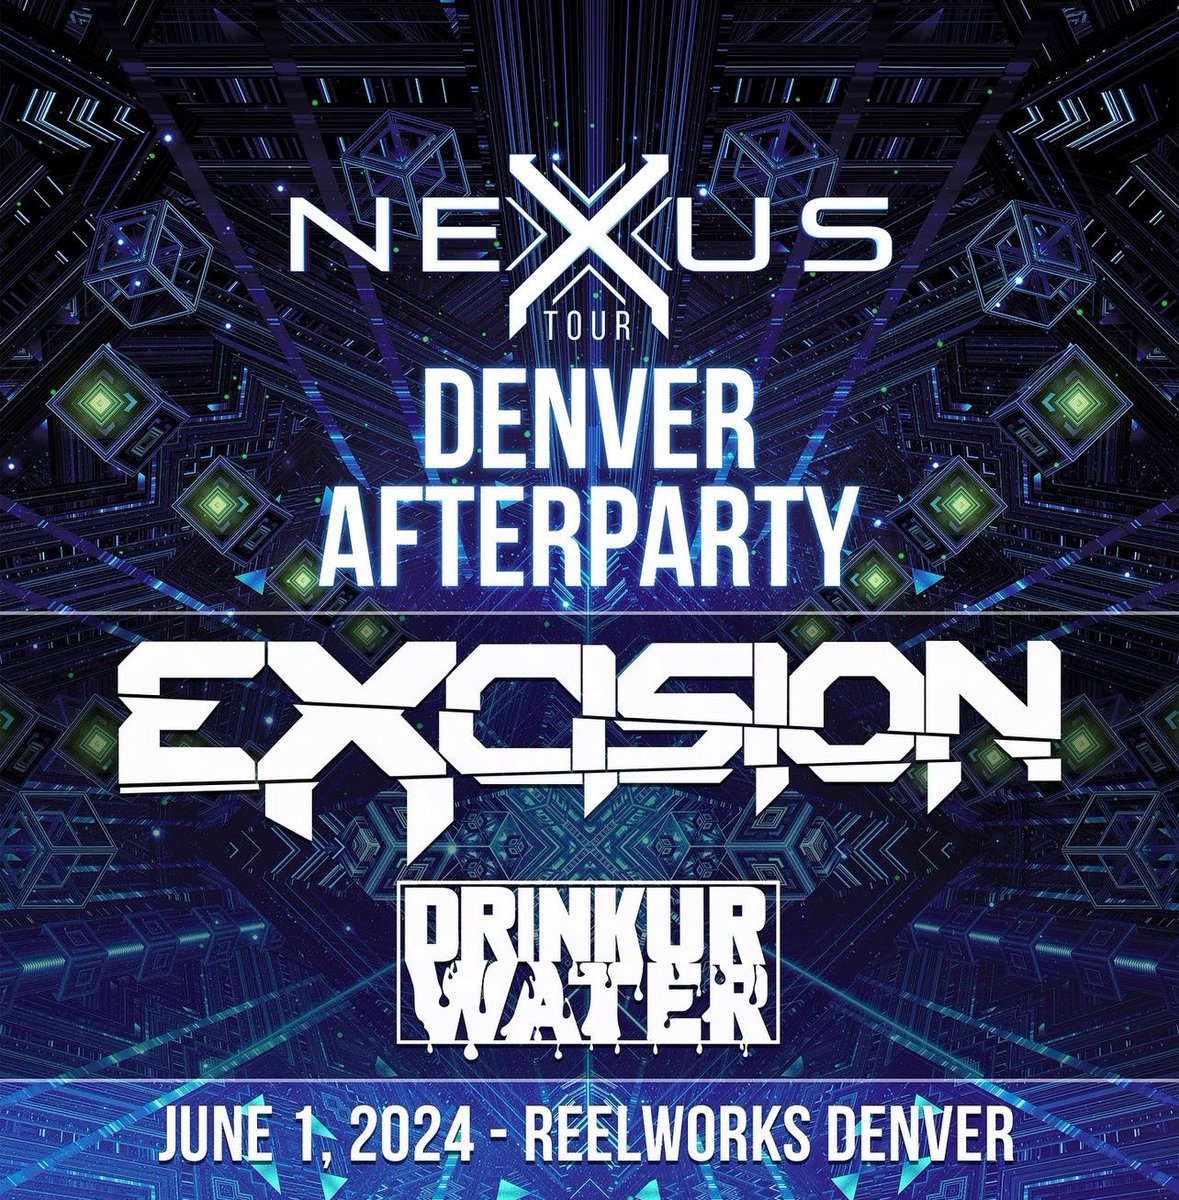 DENVER WE ARE SO CLOSE. can’t wait to party with you guys 💧 new set planned for the afters 🤝